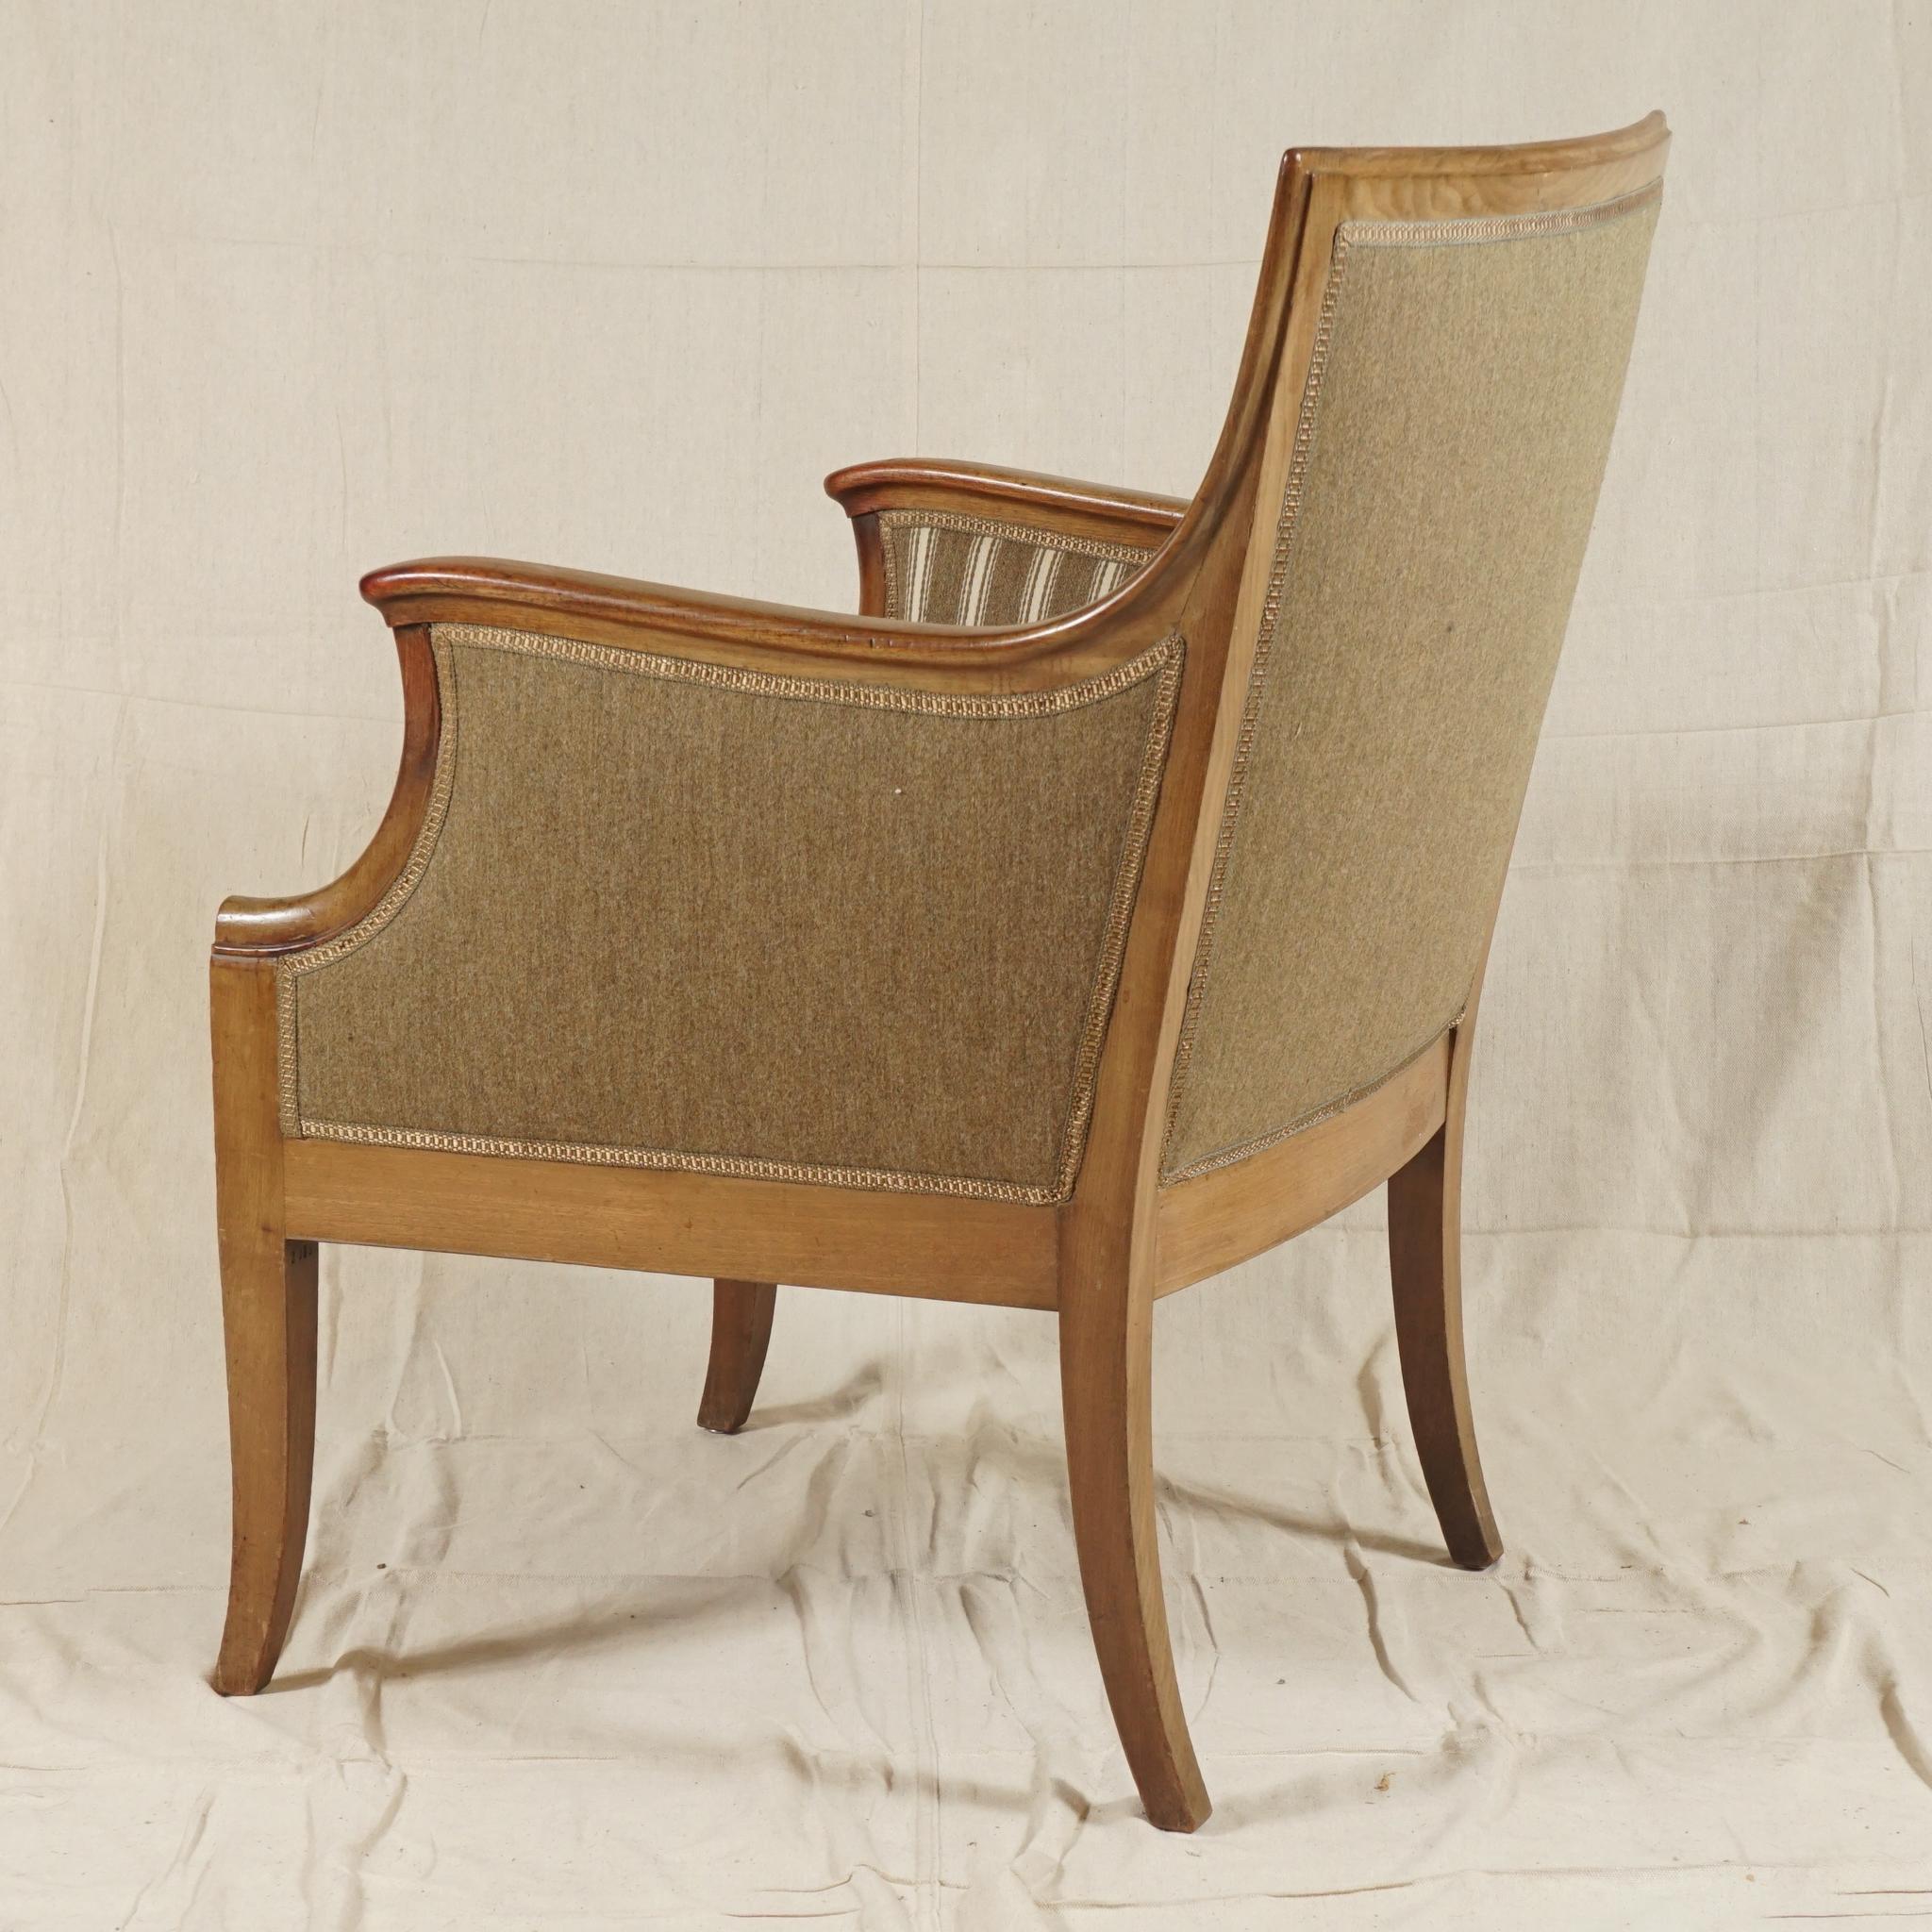 Danish Pair of Armchairs by Frits Henningsen